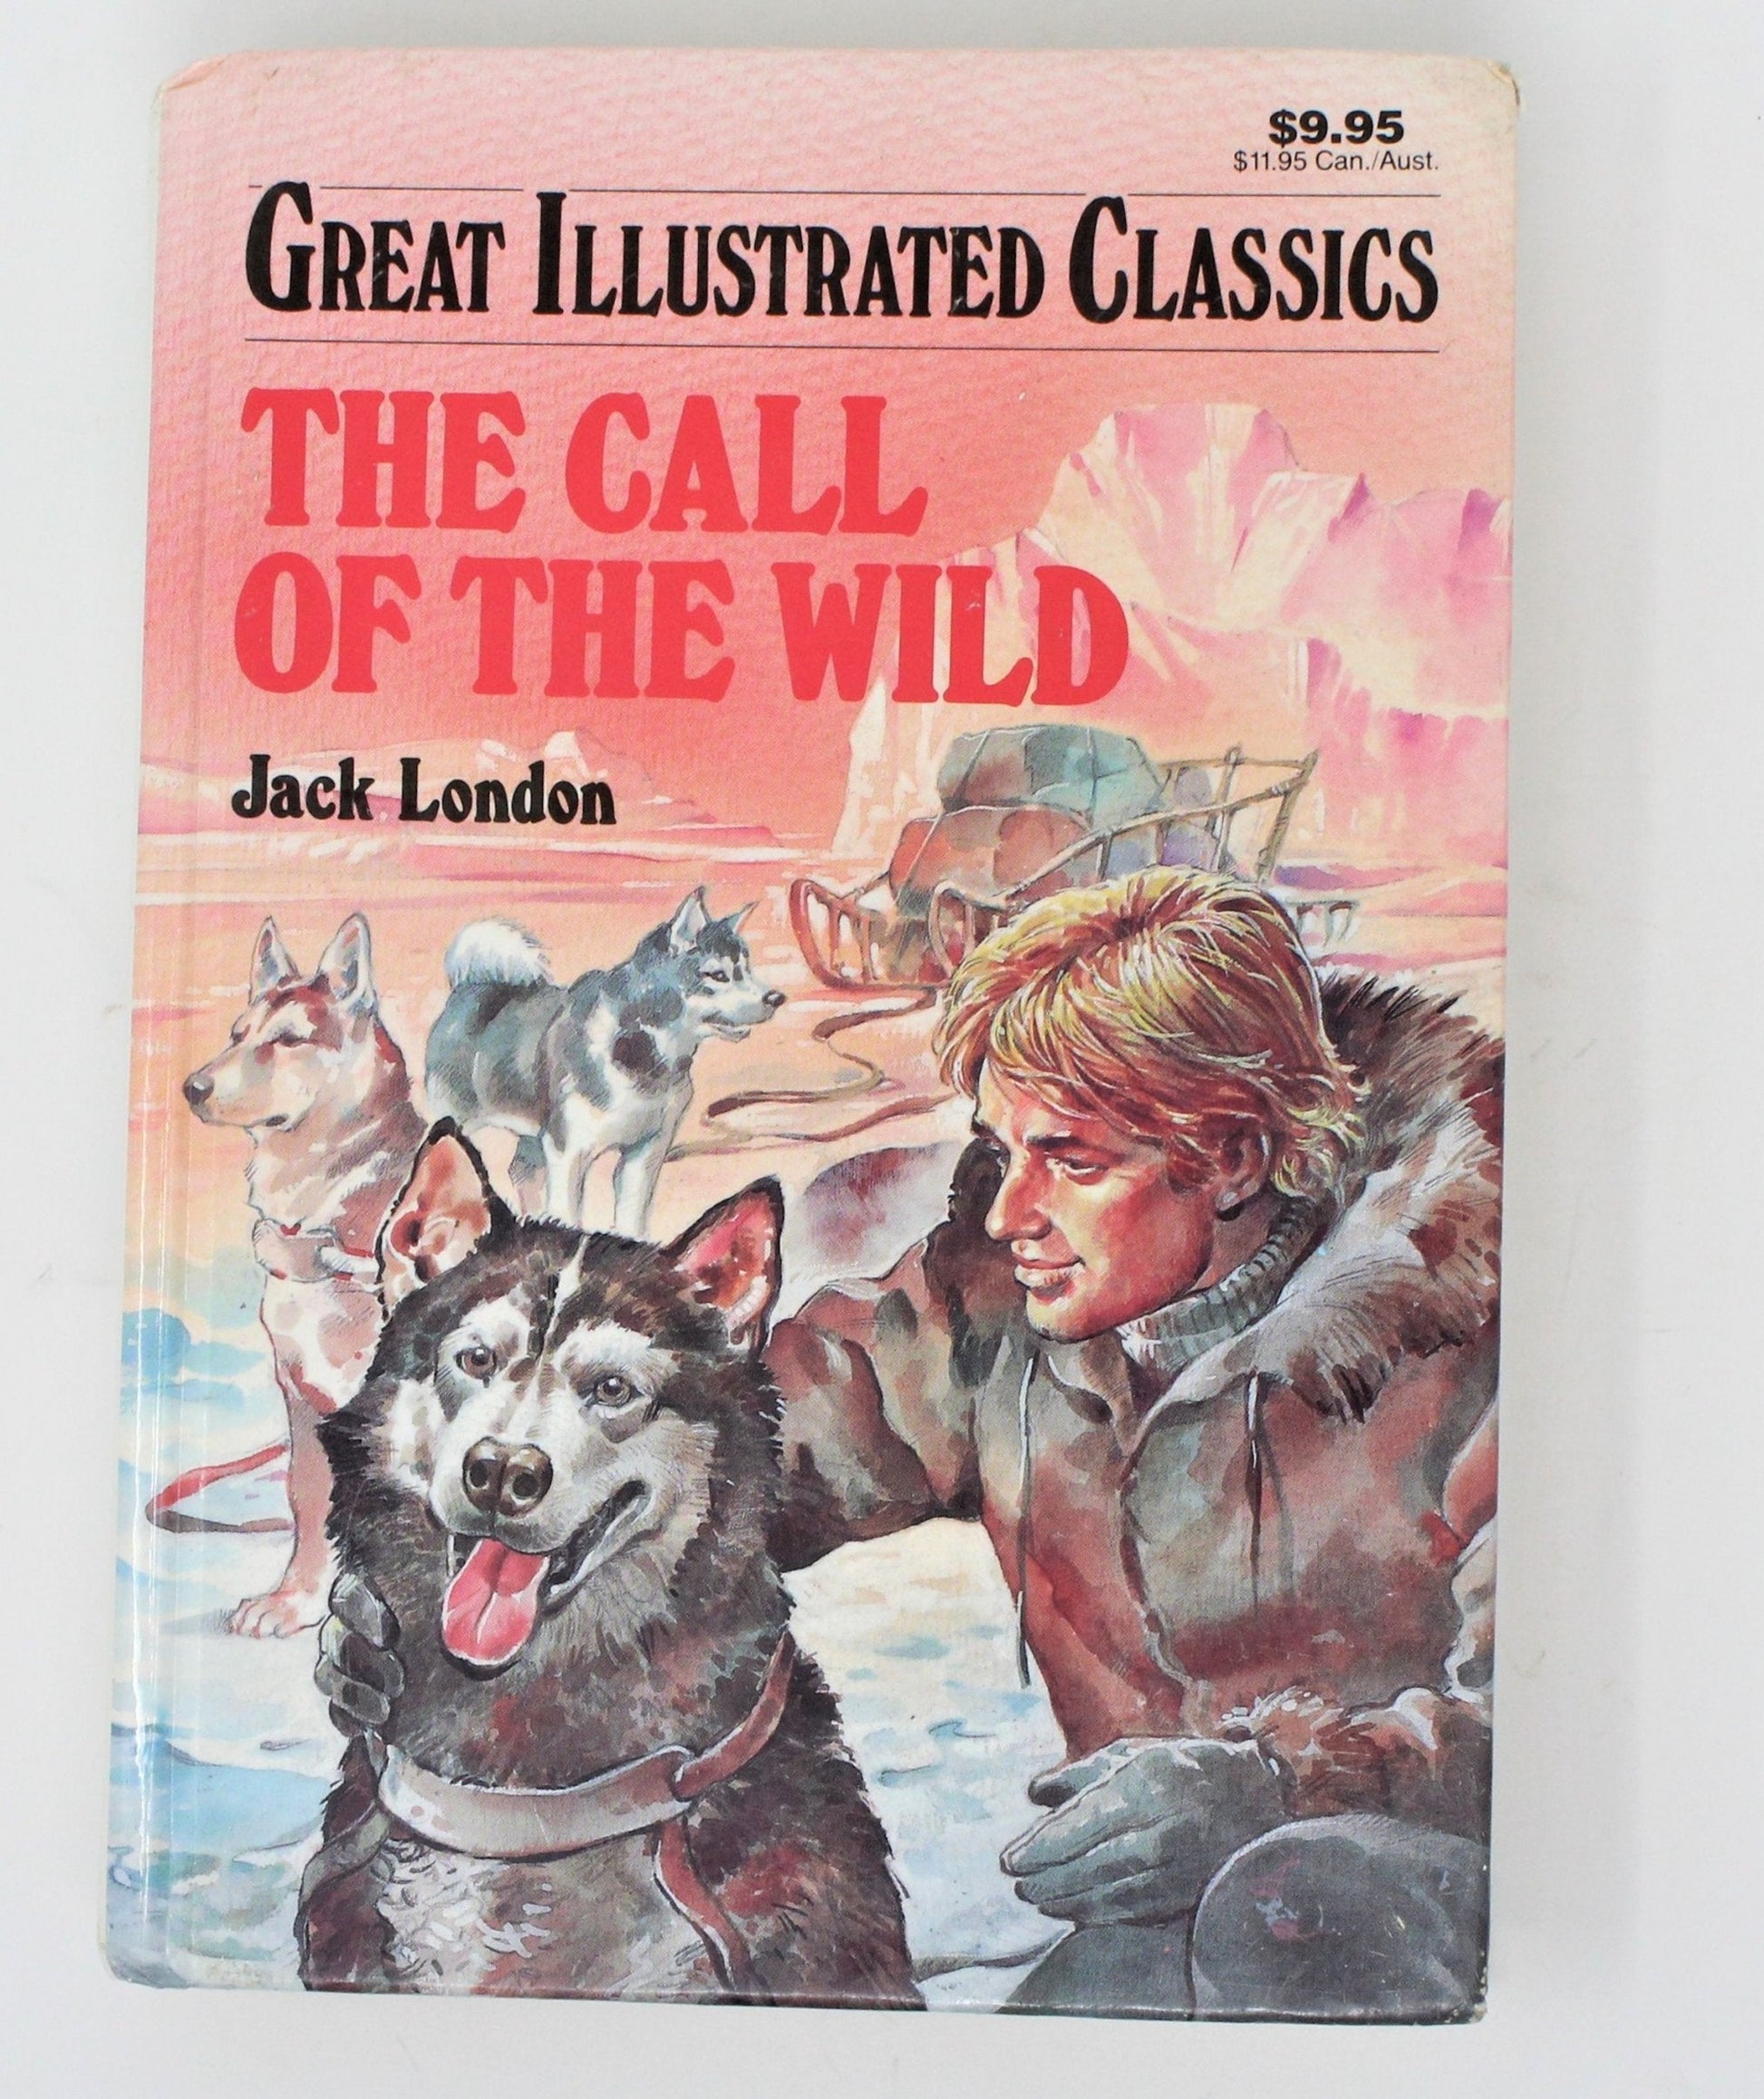 The Call of The Wild by Jack London, 1989